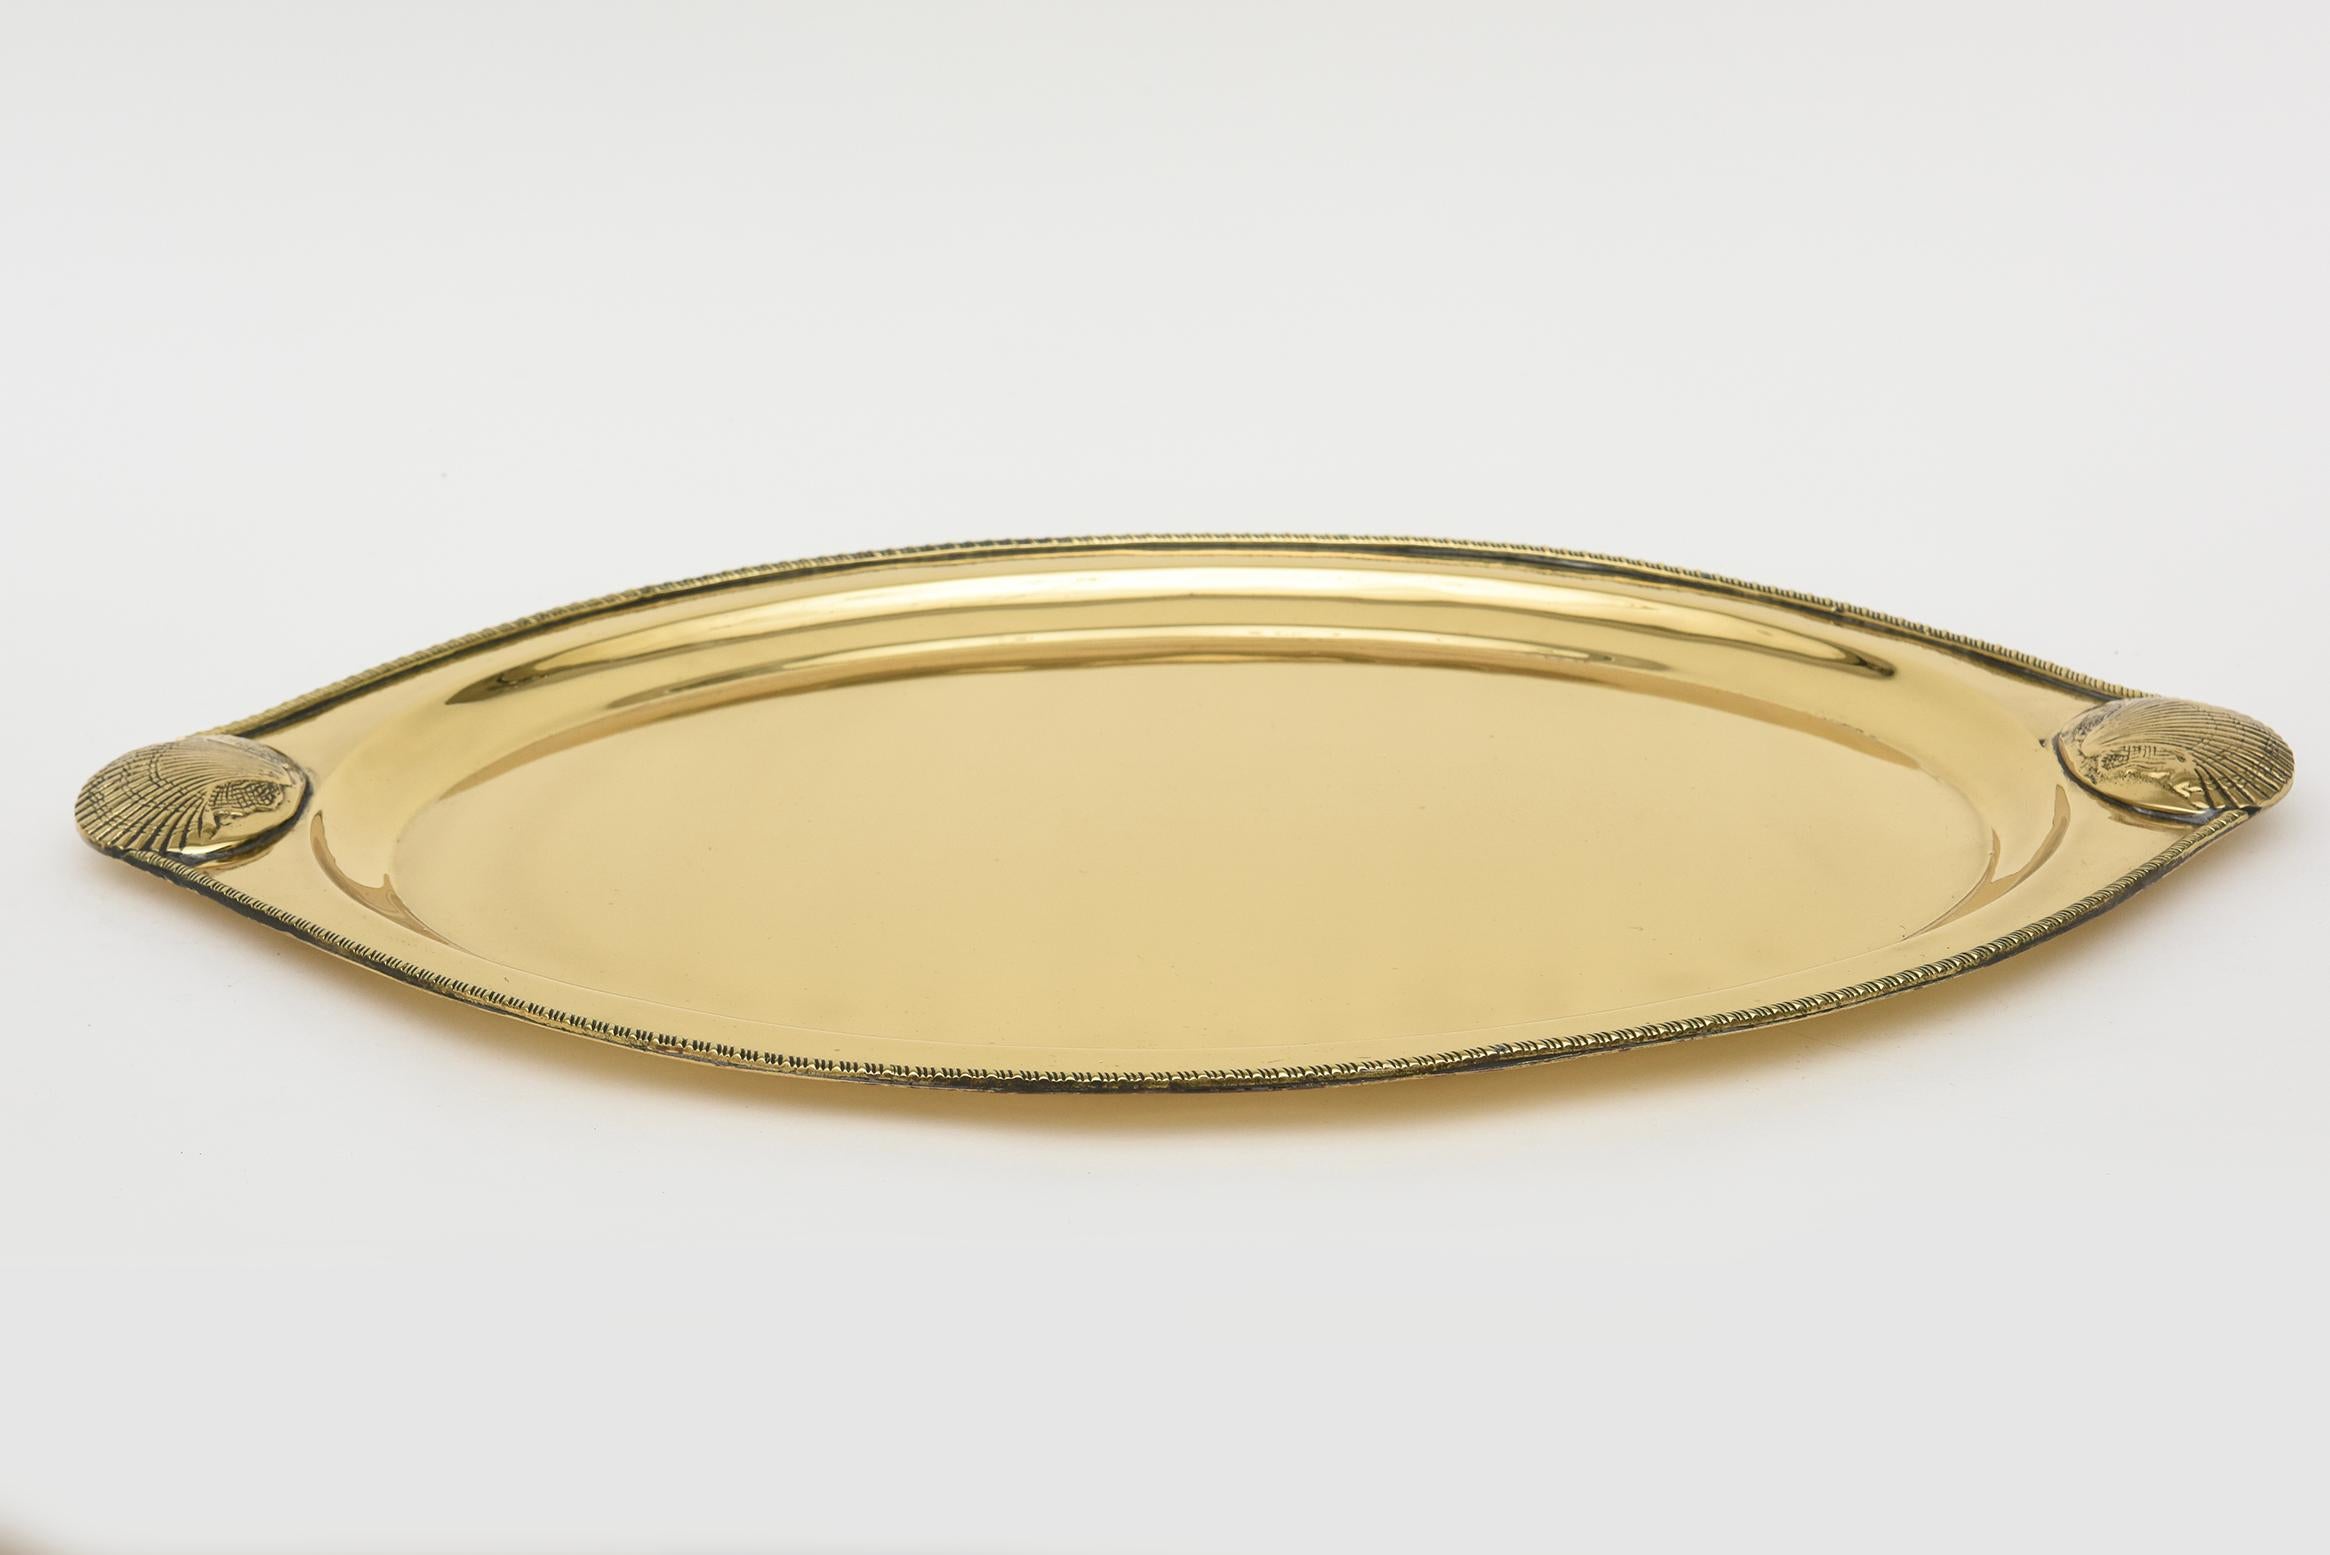 This lovely vintage brass large oval tray has 2 shell designs at both corners. There is a twisted design on the rim surround. It if from the 70's and has been polished and lacquered.  No maker marks. Nice weight. Barware.